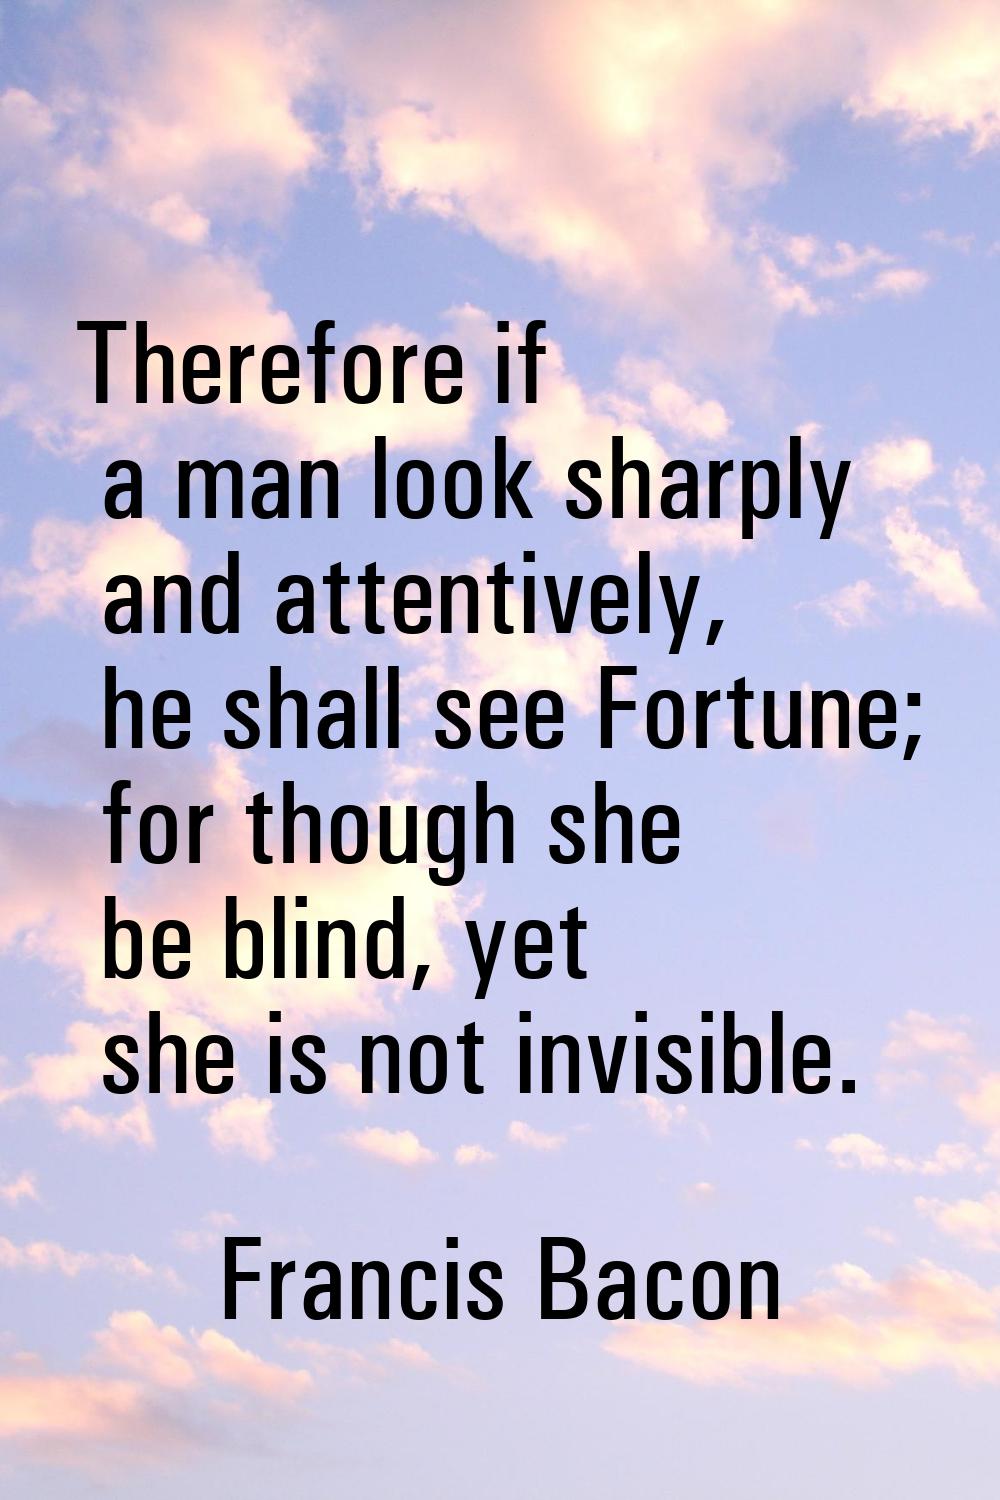 Therefore if a man look sharply and attentively, he shall see Fortune; for though she be blind, yet